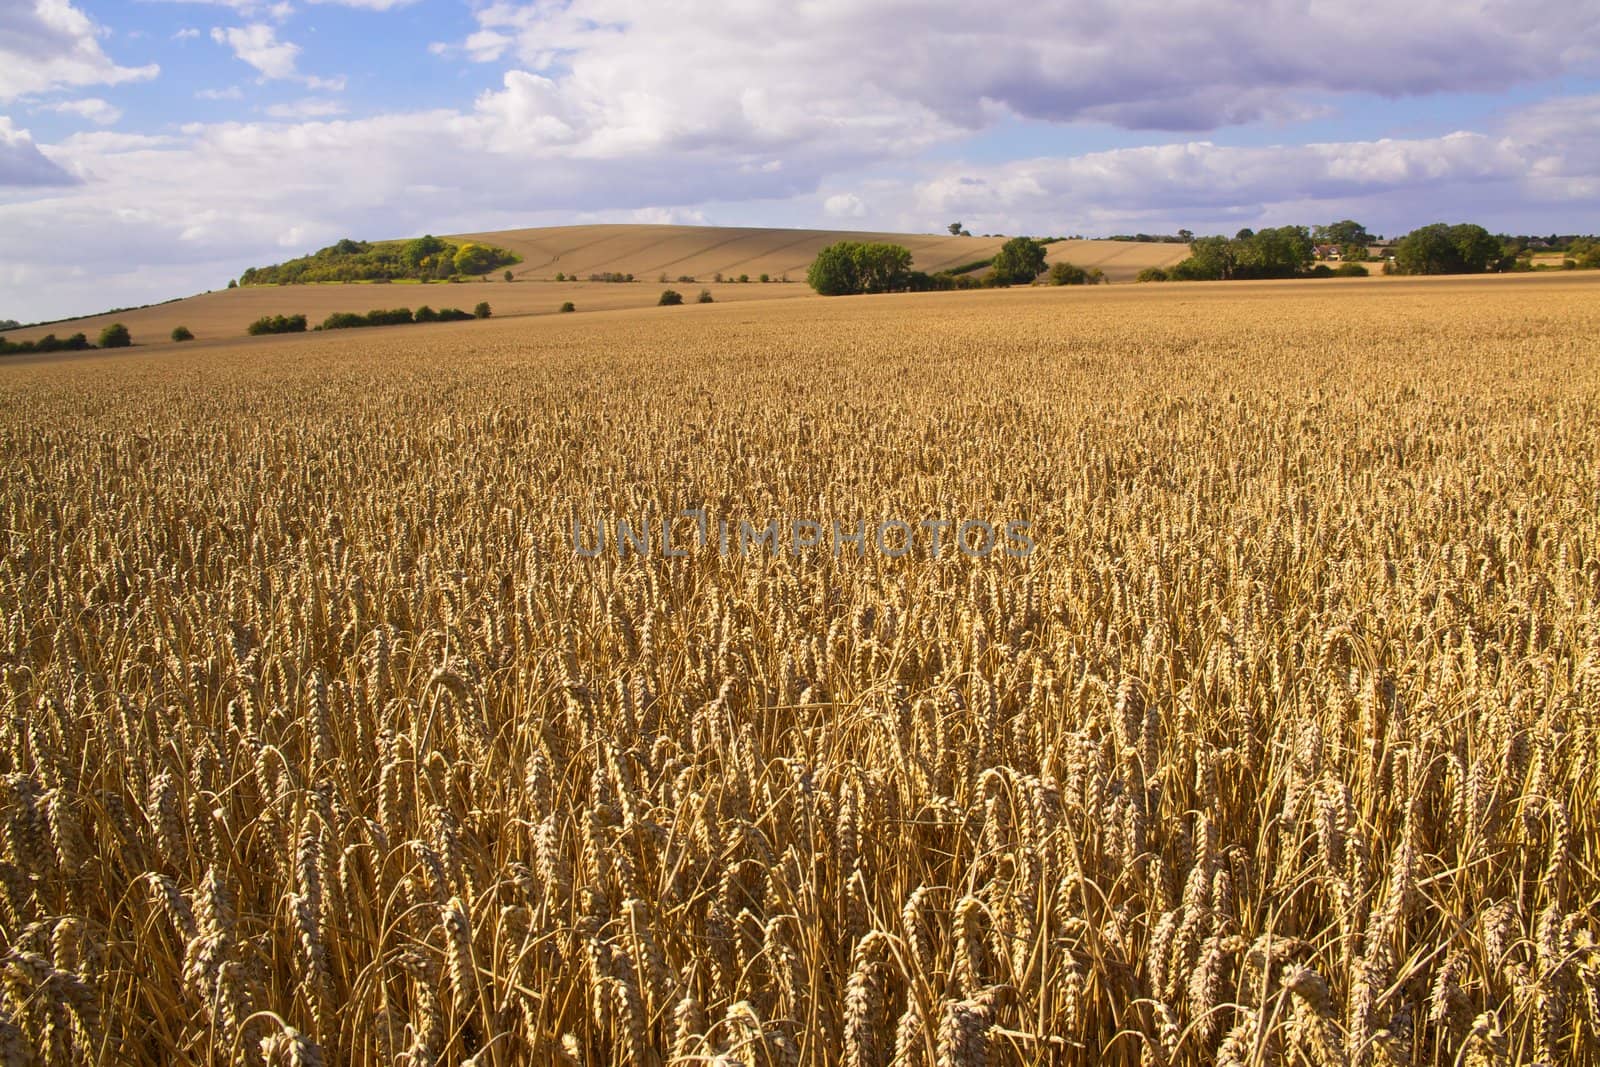 Typical landscape in central England with wheat fields